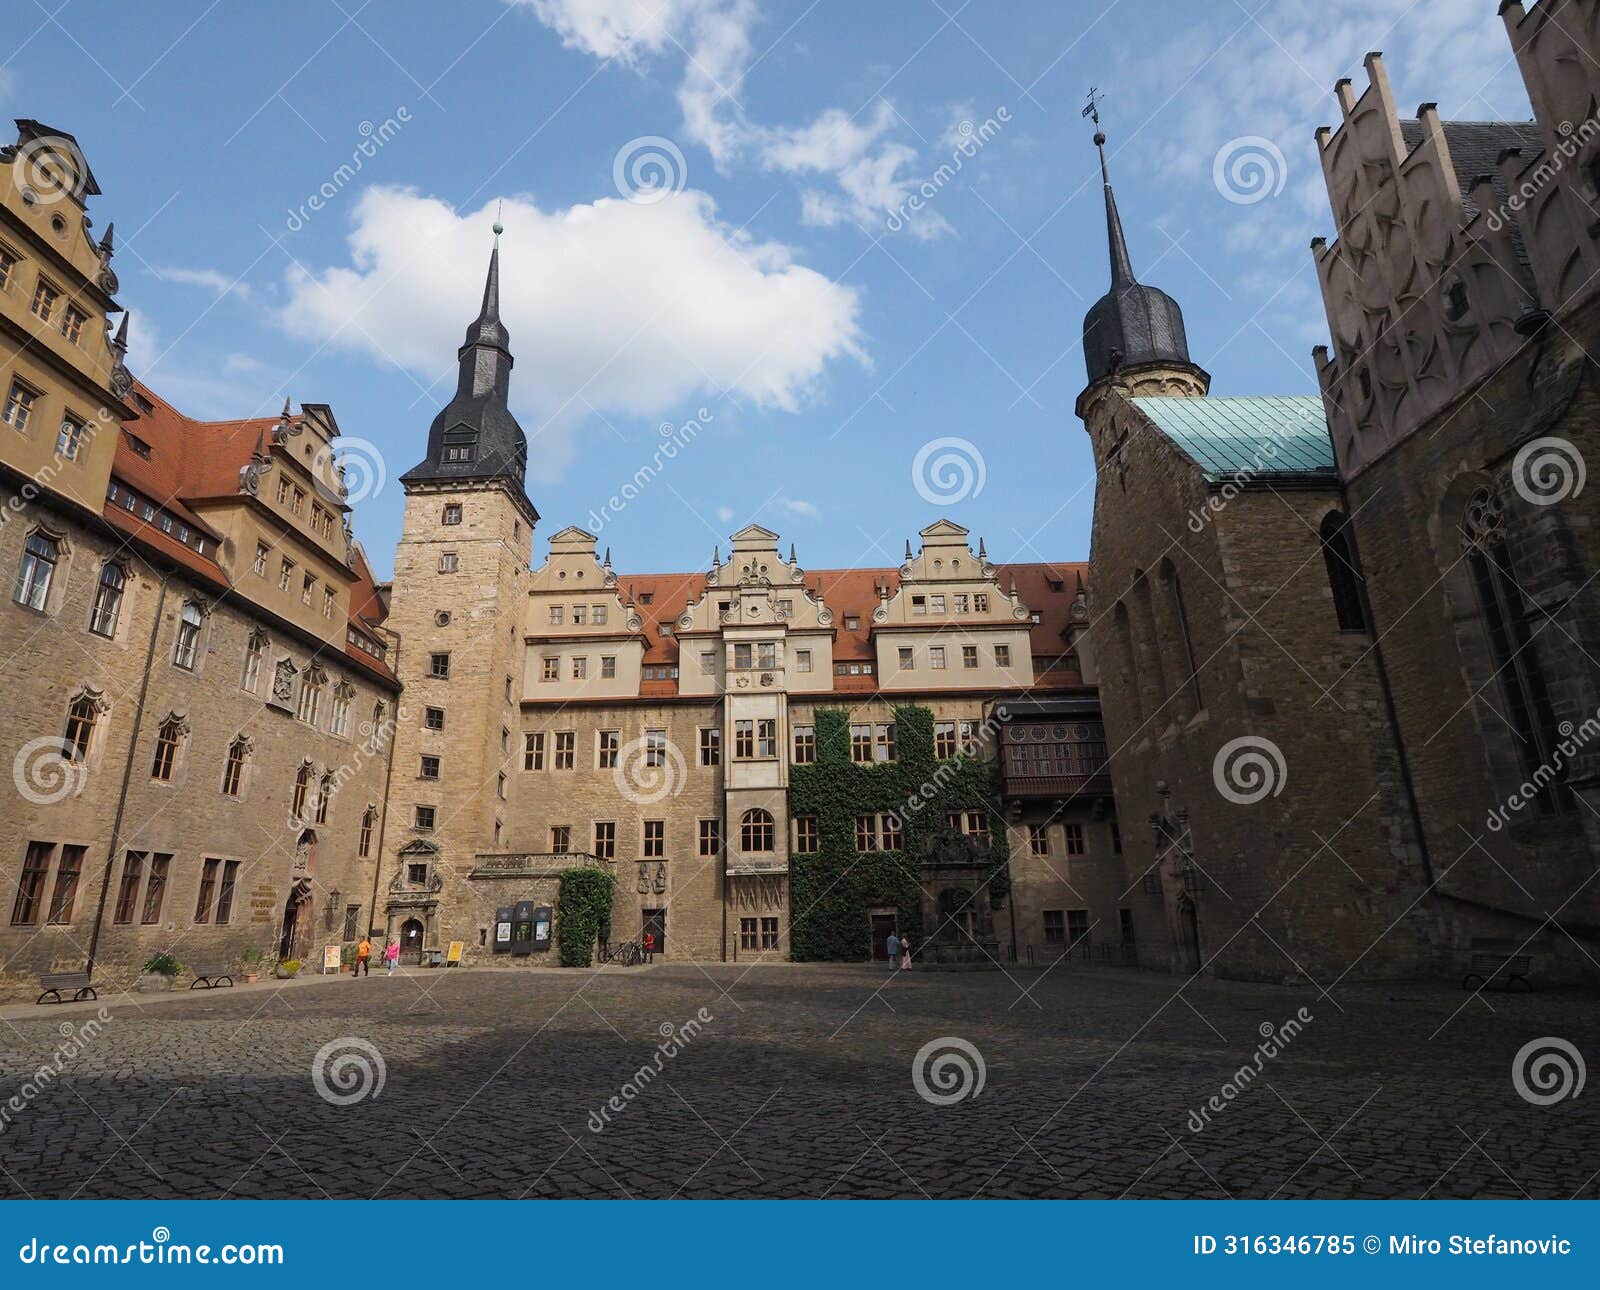 merseburg schloss (castle) - germanythe castle has been rebuilt many times since then.the ancient gothic walls.